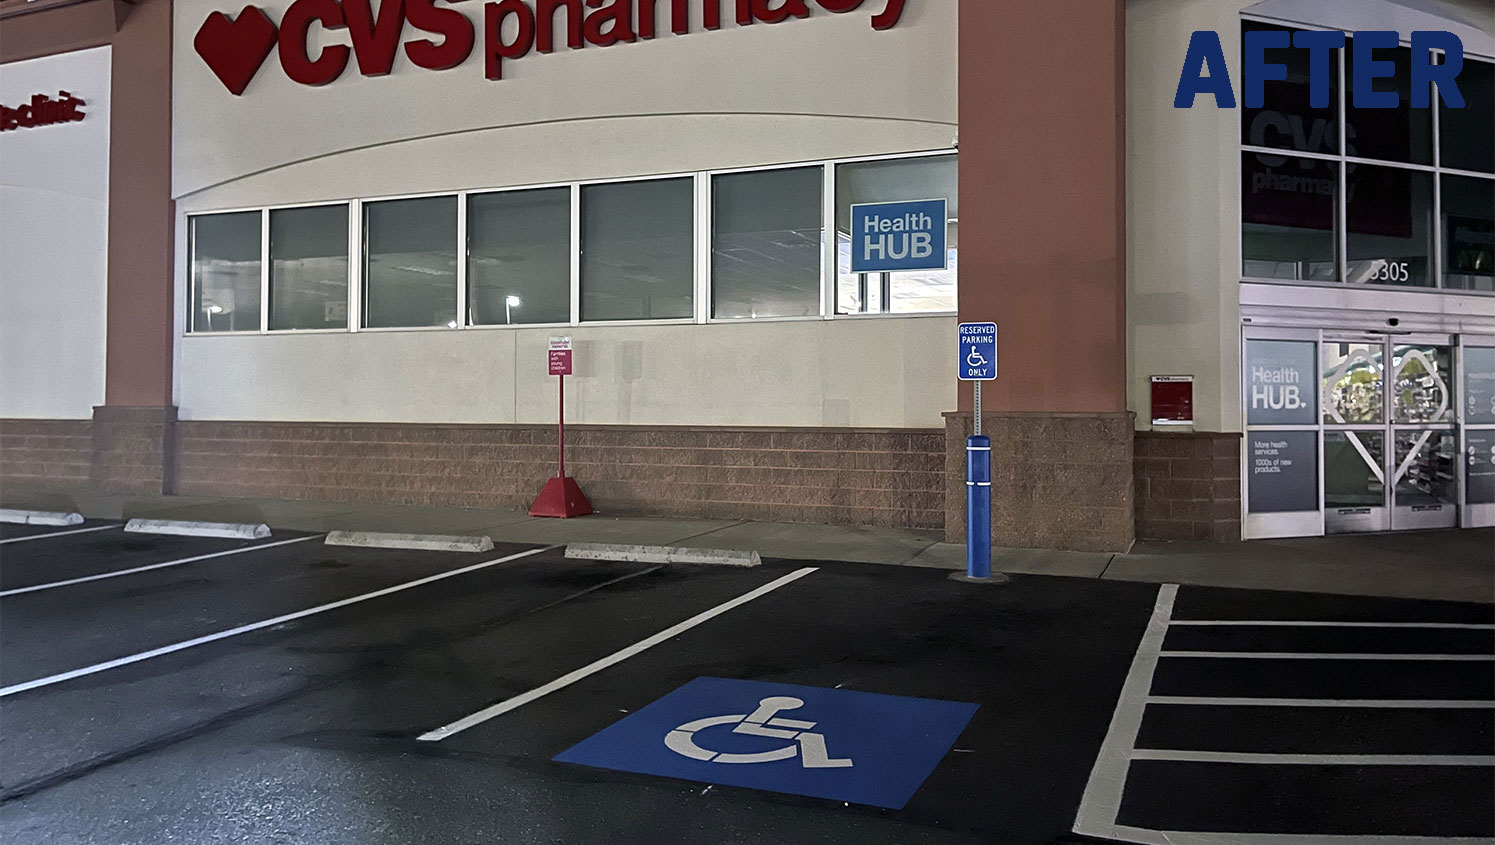 New ADA compliant stalls striped at a CVS in Roy, UT